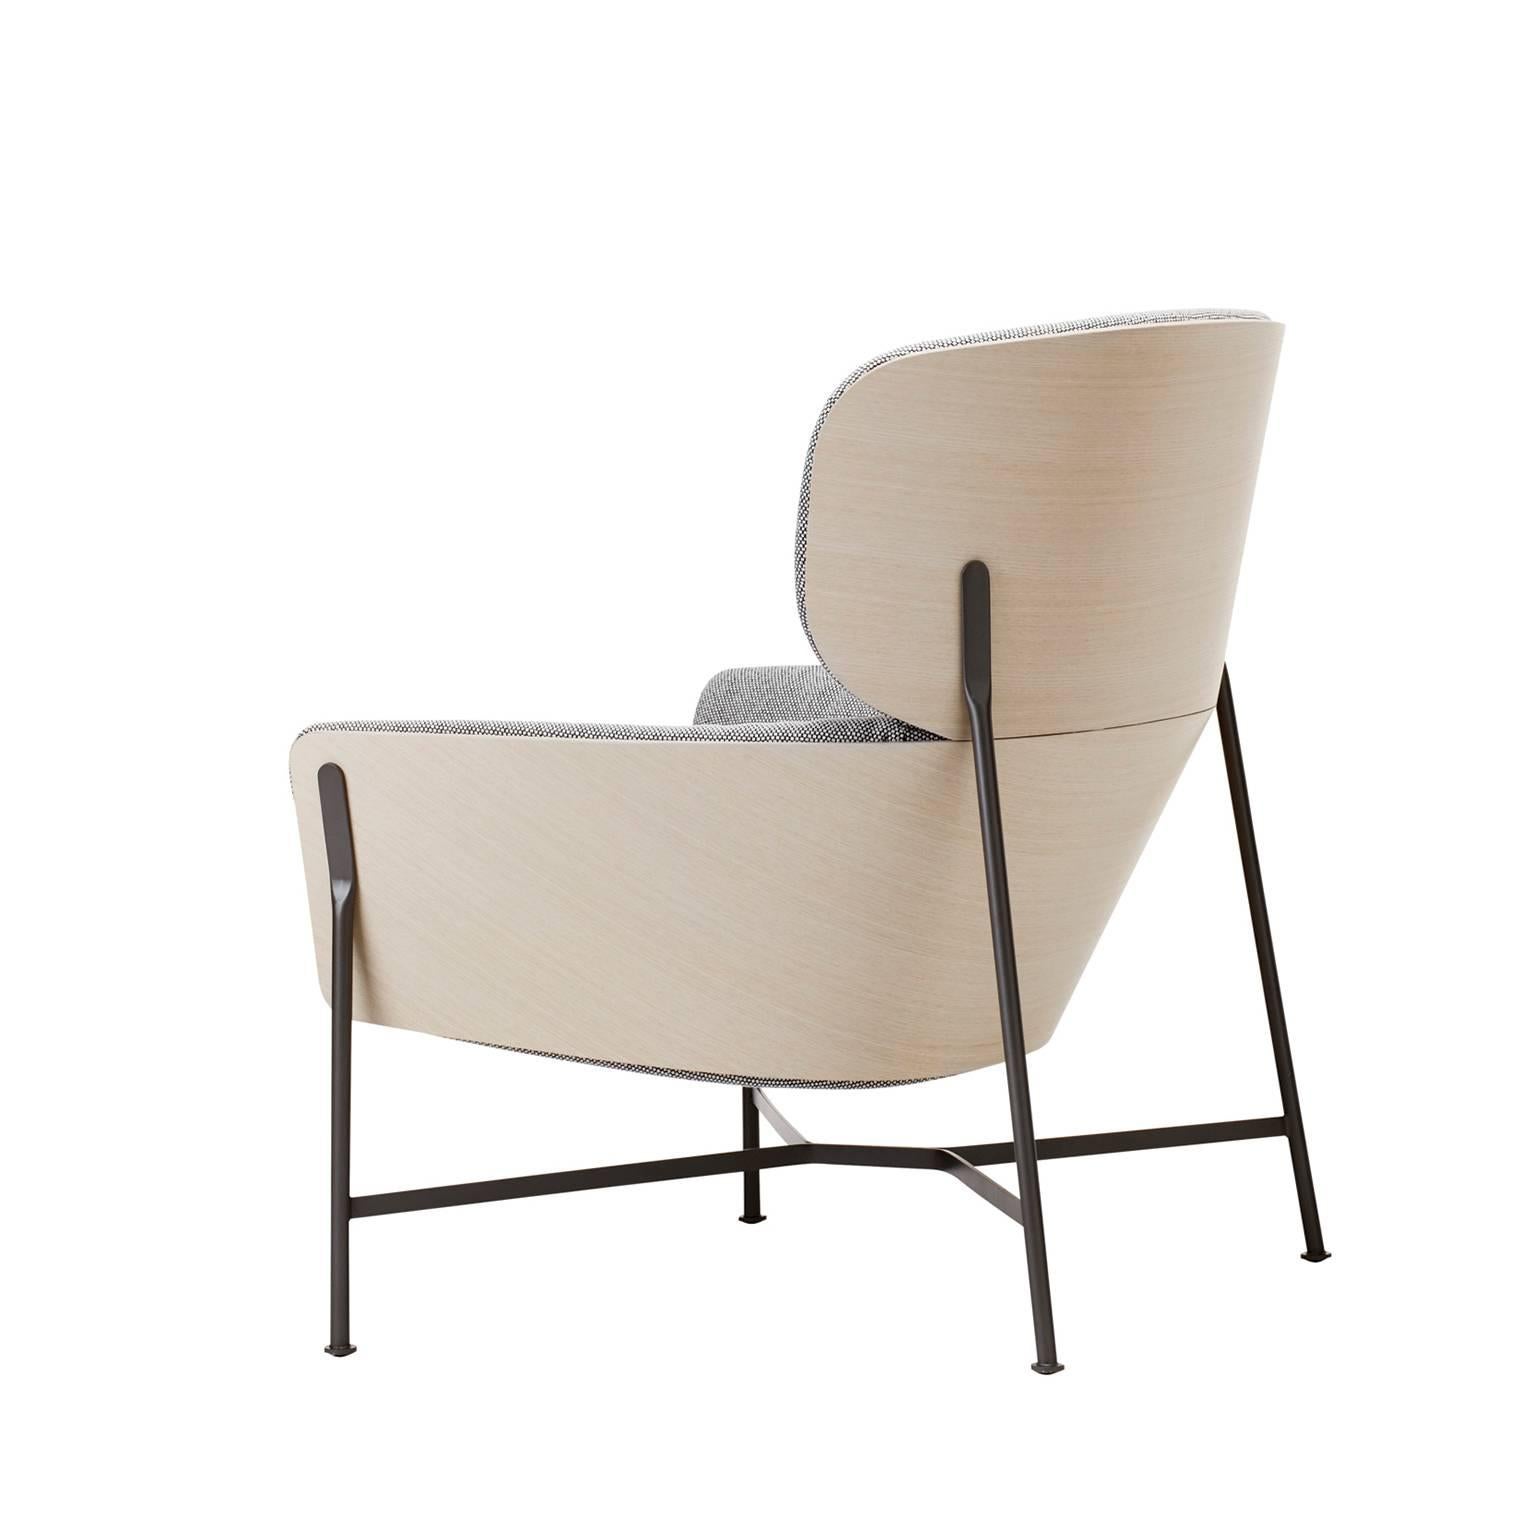 A re-interpretation of the wingback chair that would be right at home in a Palm Springs pad or a harbourside home. The contoured timber shell and soft upholstery are cradled within a sleek steel frame. Available with a high or low